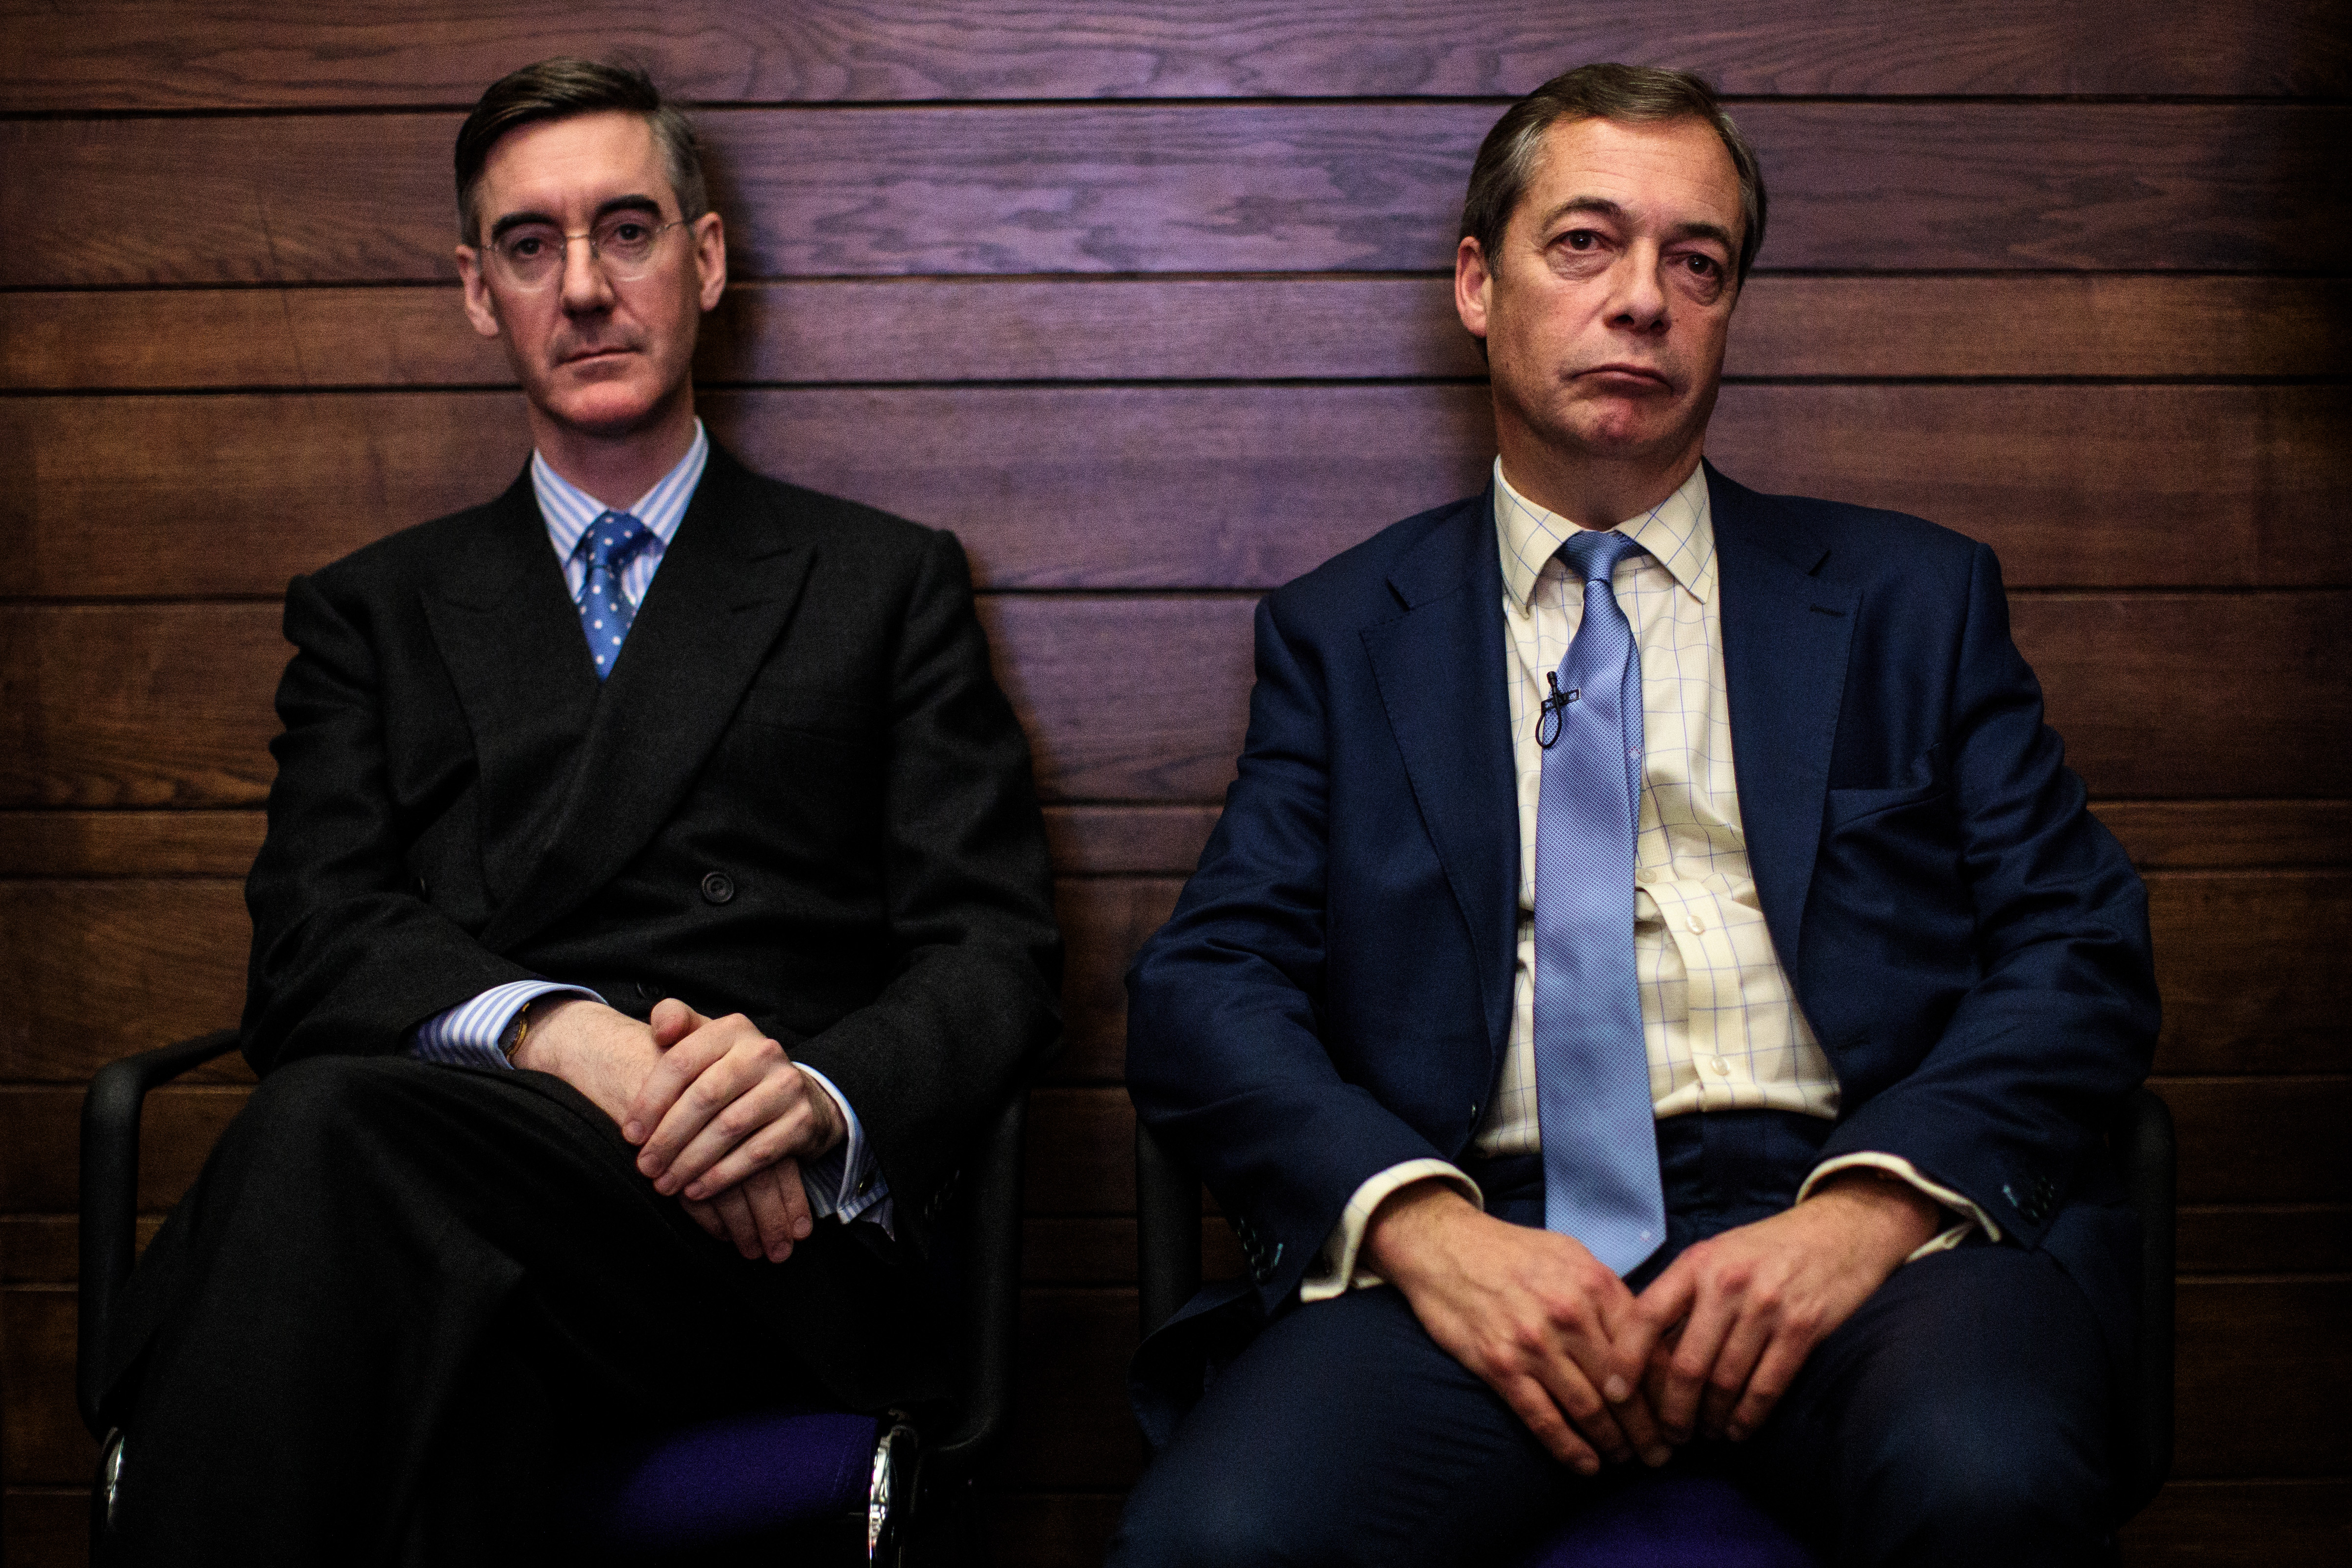 LONDON, ENGLAND - DECEMBER 14: Conservative MP Jacob Rees-Mogg and British MEP Nigel Farage attend a 'Leave Means Leave' Brexit rally at the Queen Elizabeth II Centre on December 14, 2018 in London, England. Several politicians and public figures will speak at a series of rallies by the Leave Means Leave campaign calling on the Government to push ahead with Britain's swift departure from the European Union. (Photo by Jack Taylor/Getty Images)